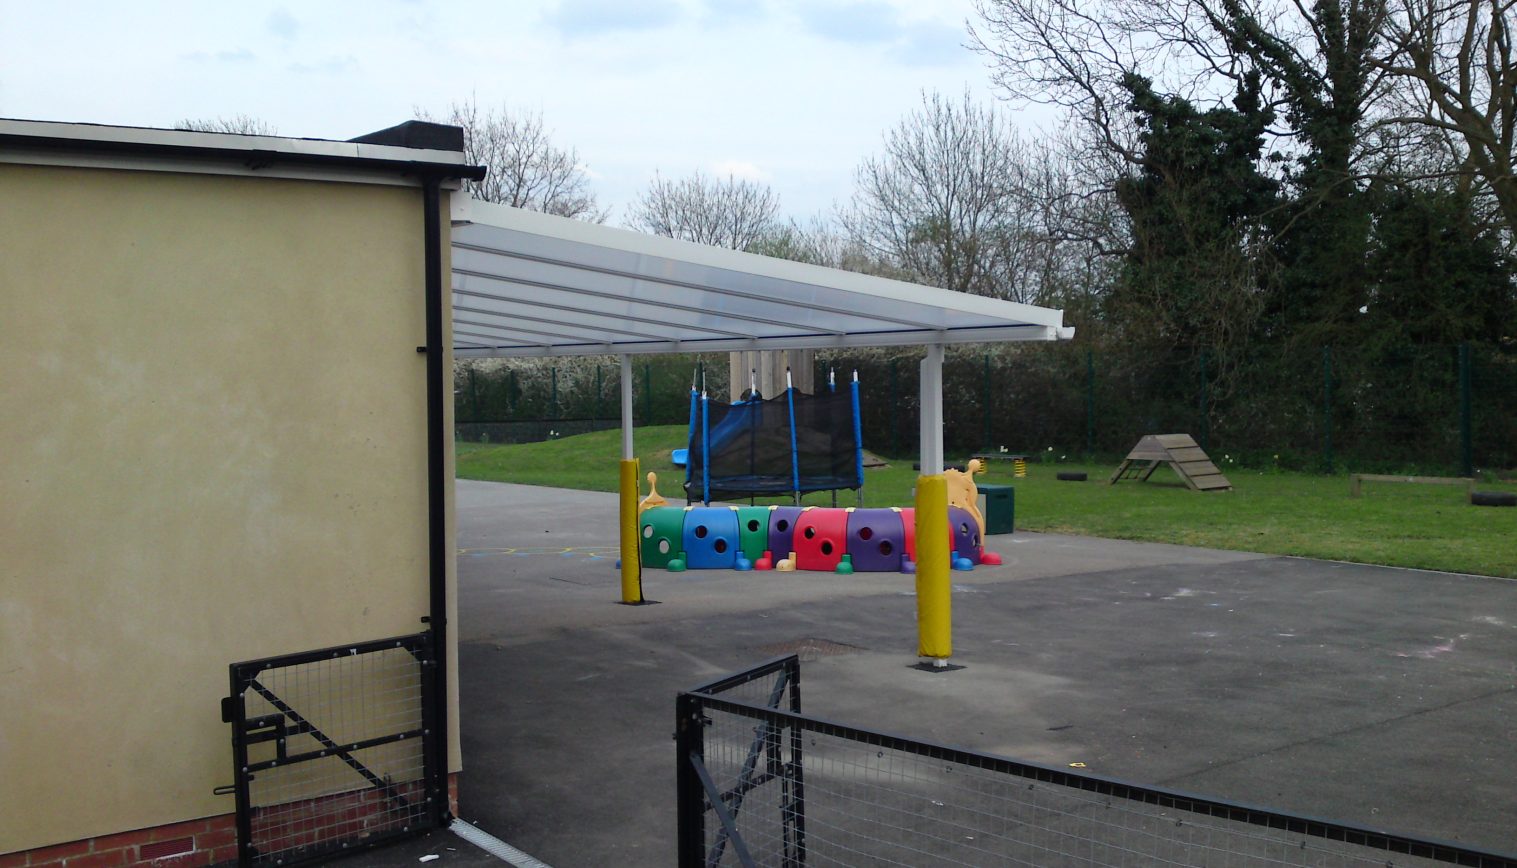 Hobbs Hill Wood Primary School – Wall Mounted Canopy – Second Install